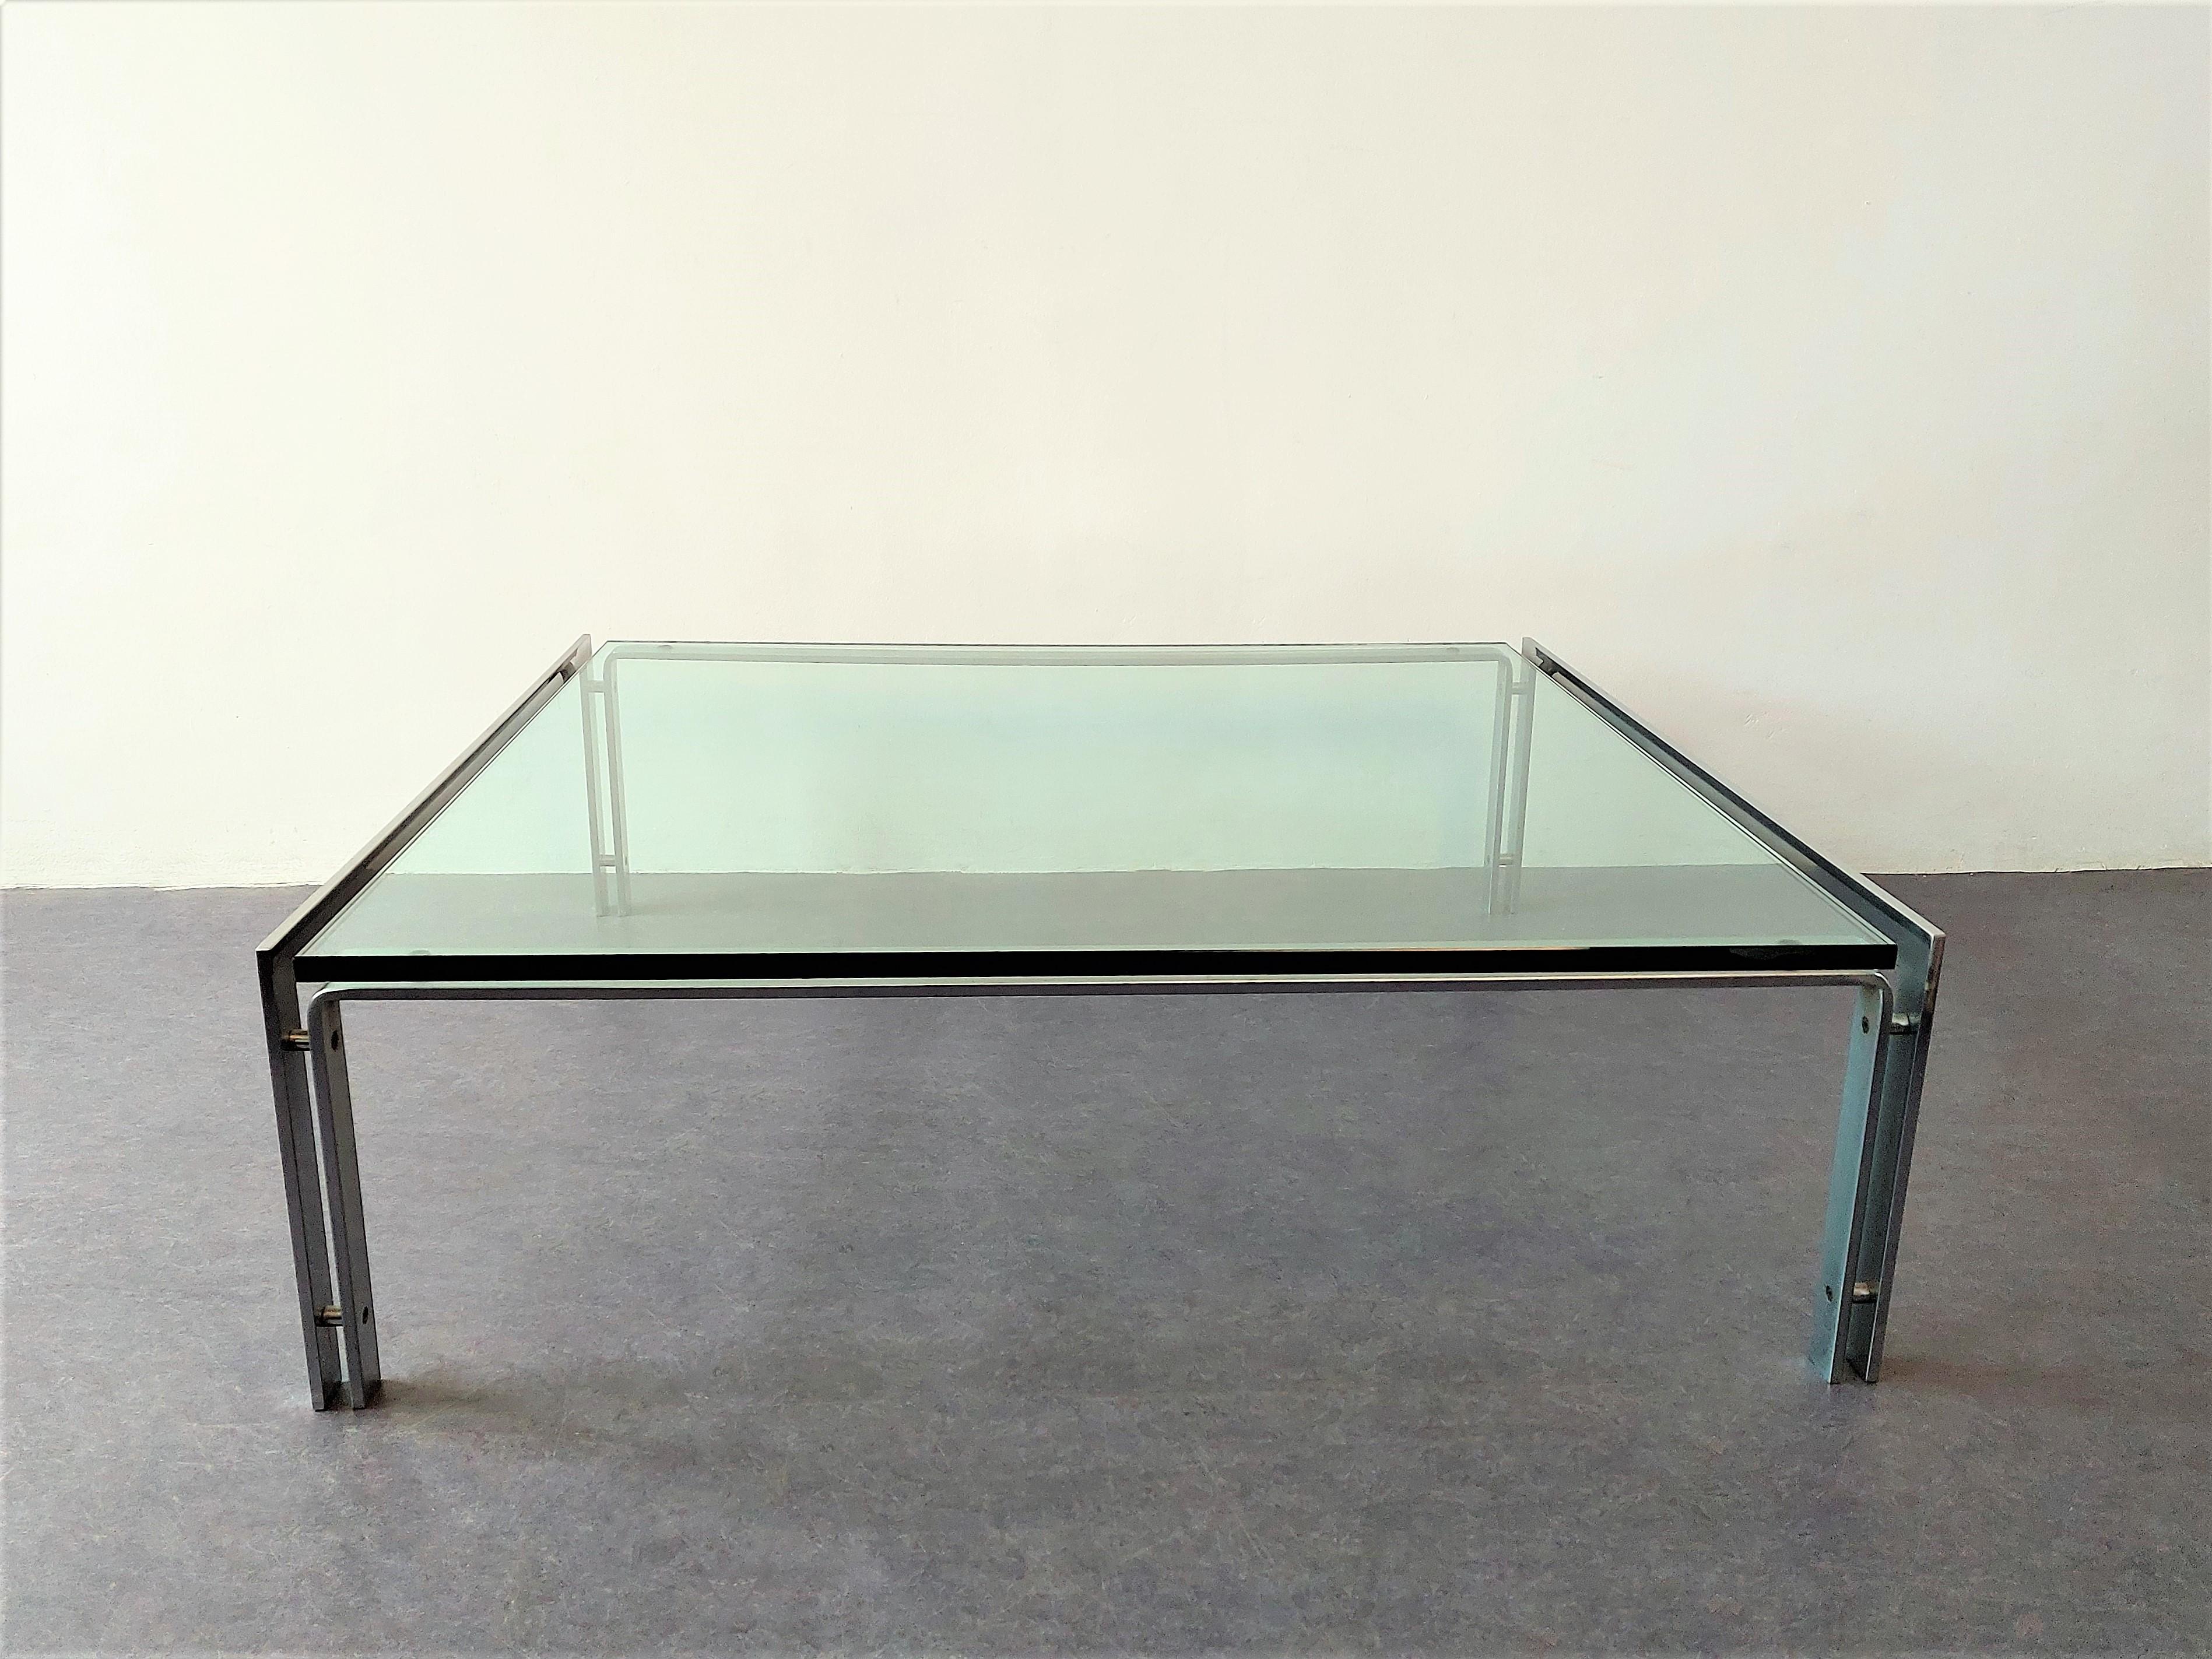 Dutch Large Steel and Glass M1 Coffee Table by Hank Kwint for Metaform, 1980's For Sale